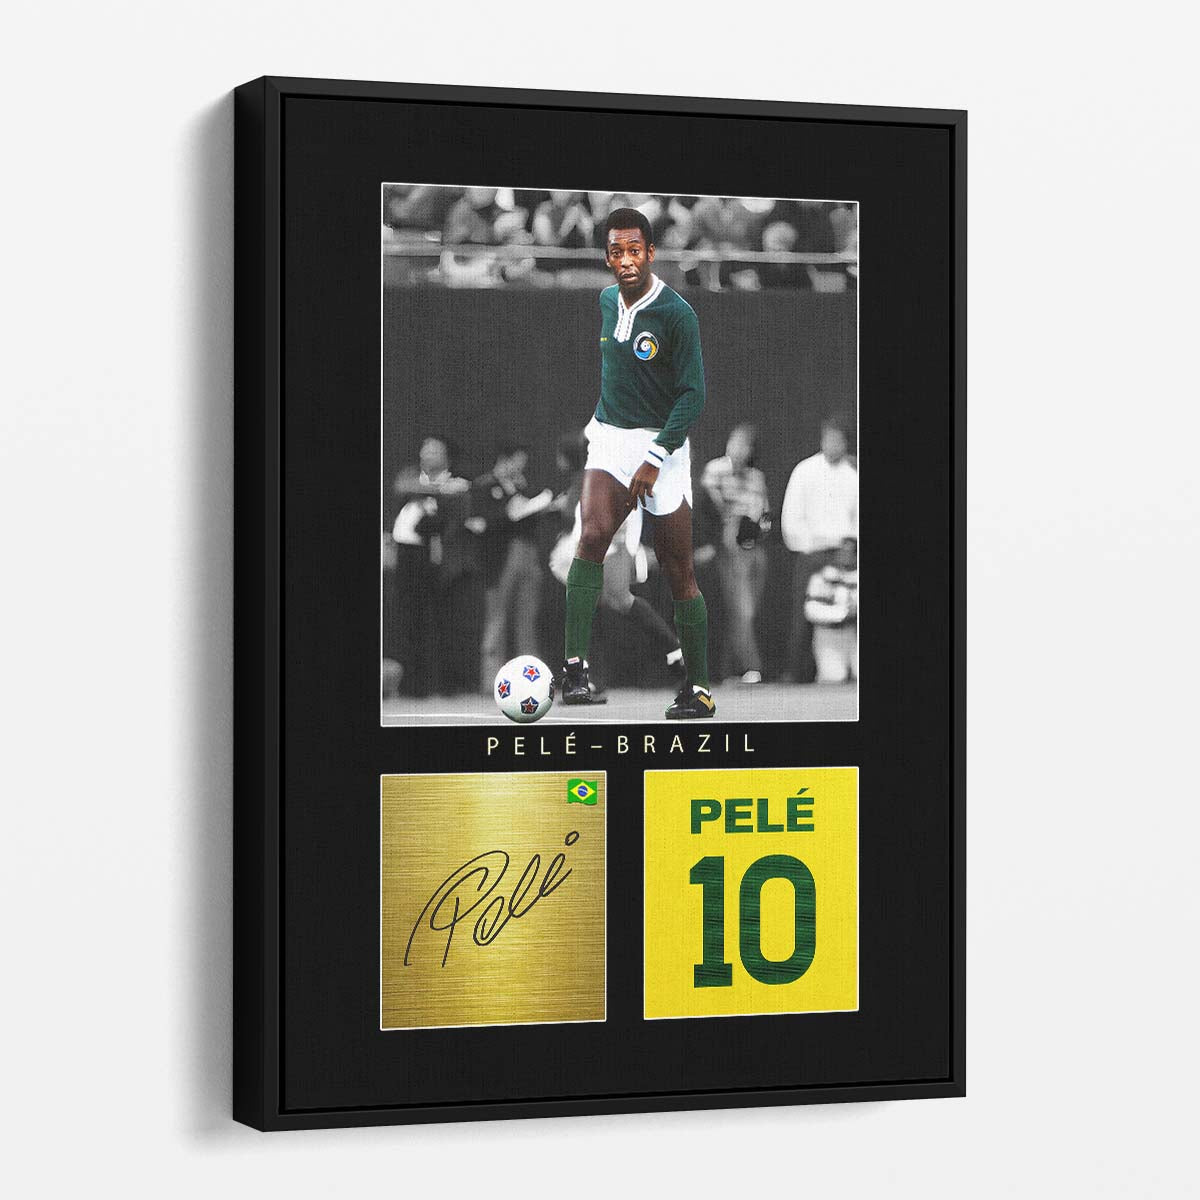 Pele Brazil World Cup Signature Wall Art by Luxuriance Designs. Made in USA.